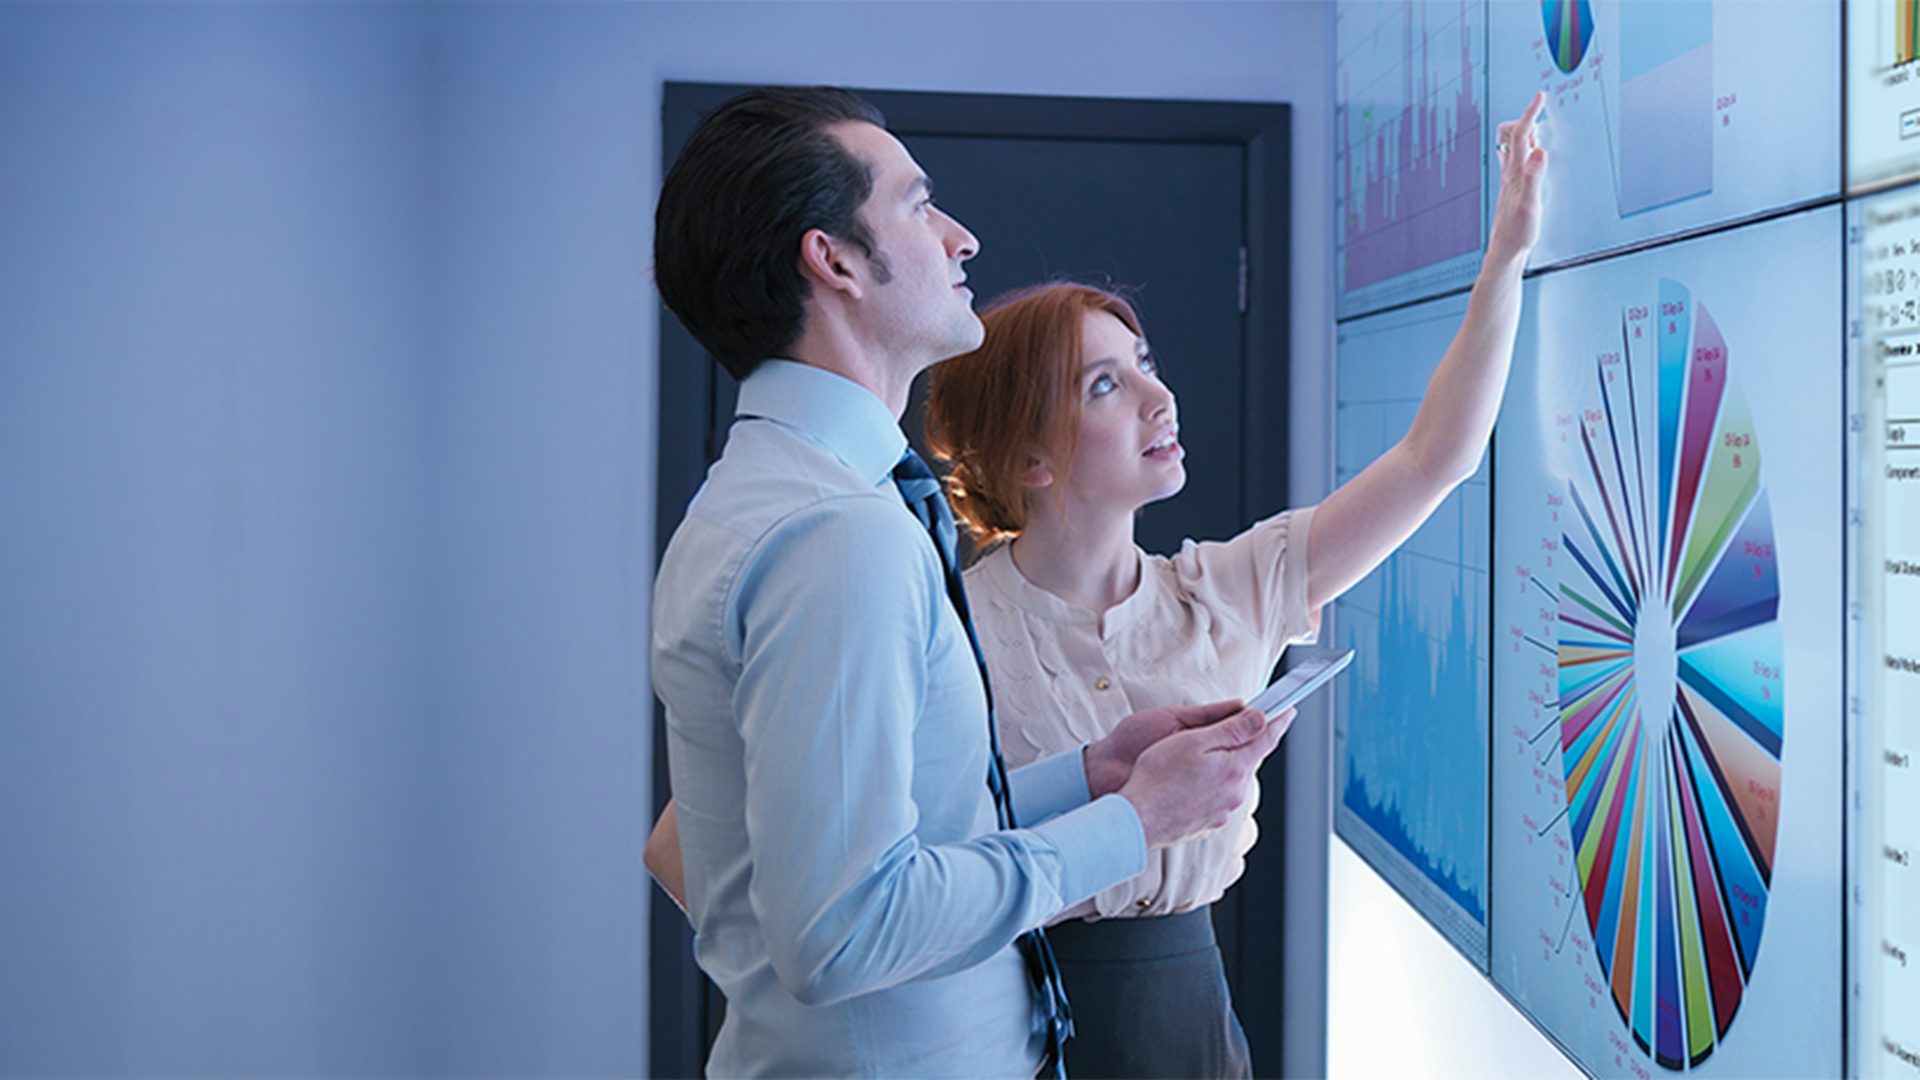 A man and a woman review Opcenter operations analytics displayed on wall monitors